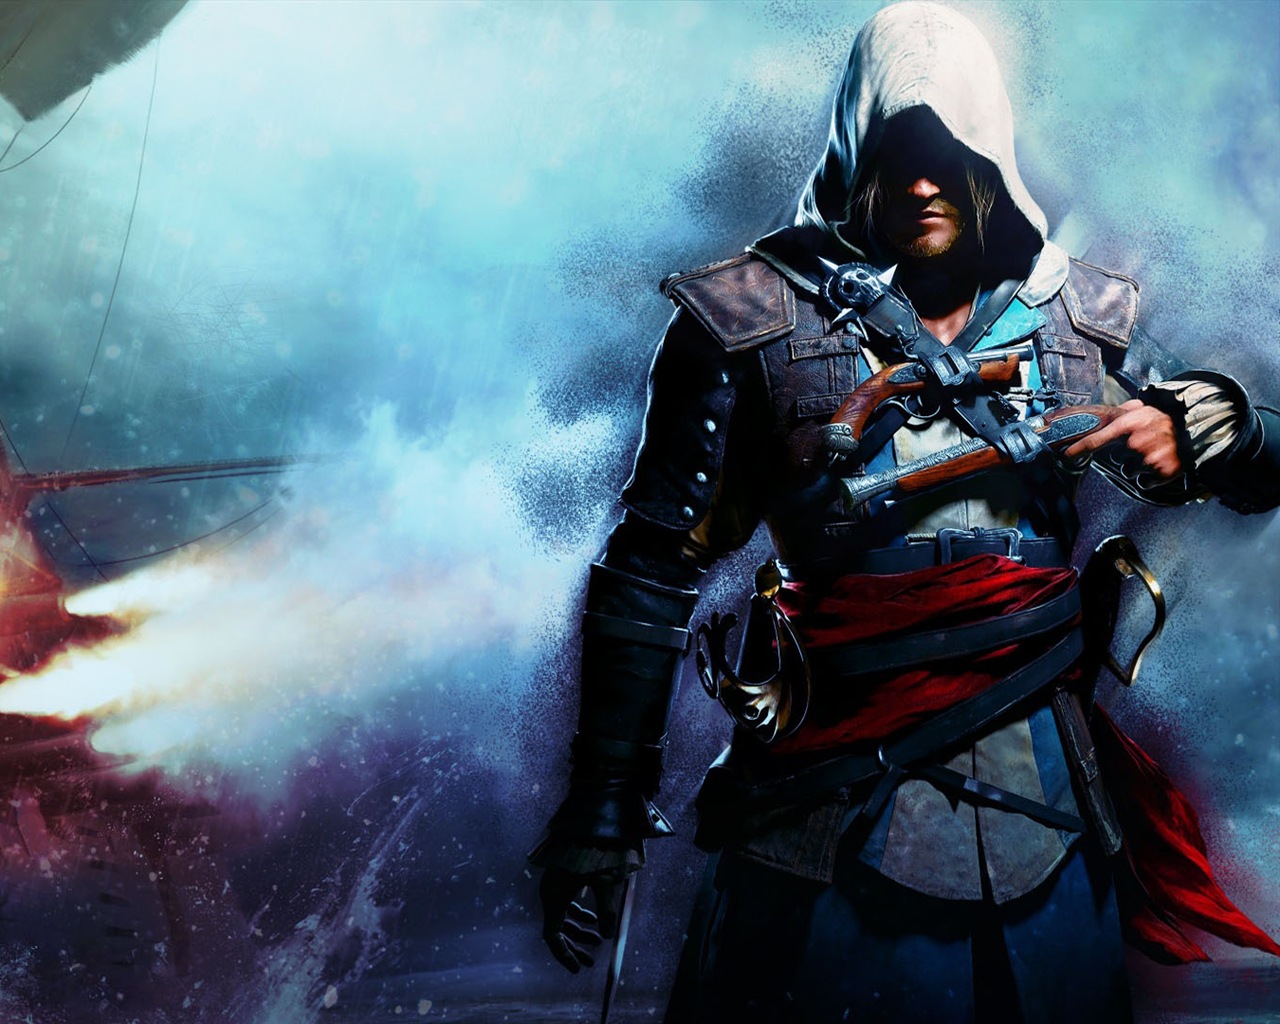 Creed IV Assassin: Black Flag HD wallpapers #2 - 1280x1024